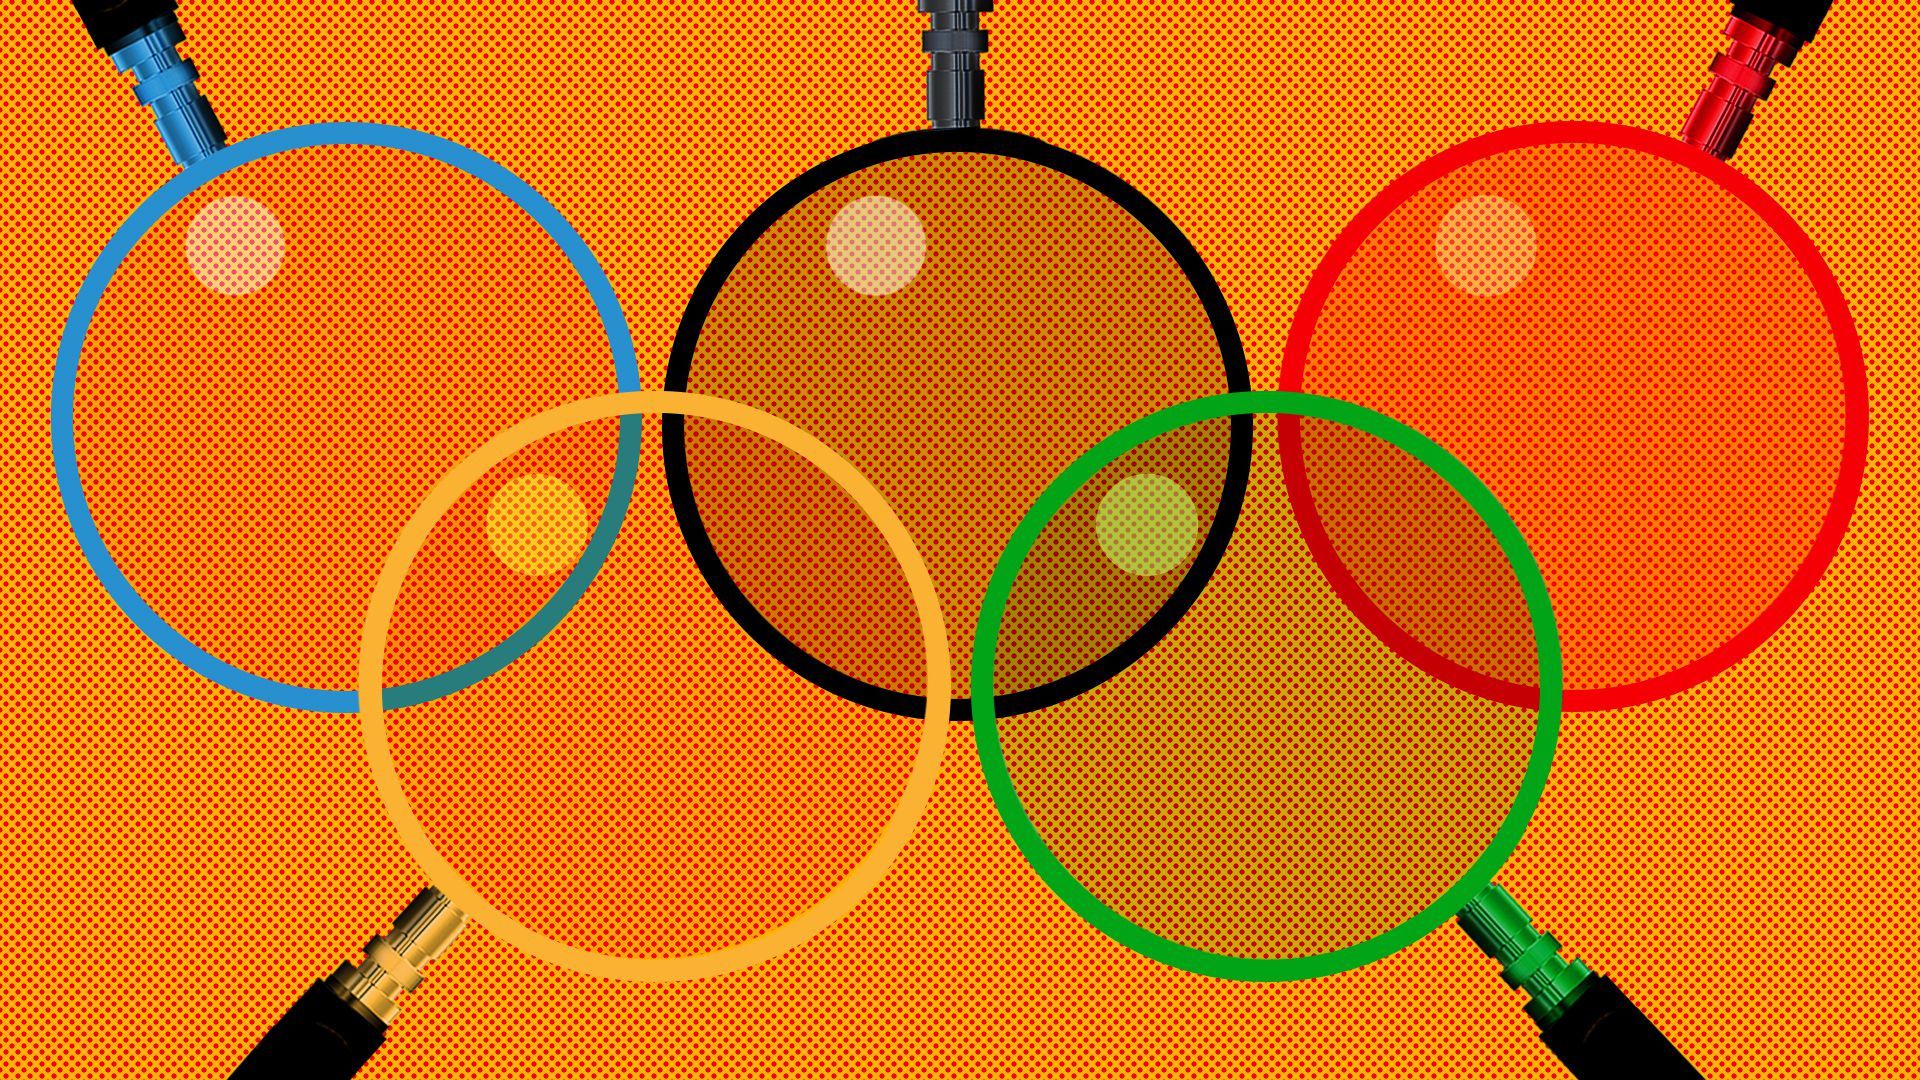 Illustration of a series of magnifying glasses in the shape of the Olympics logo